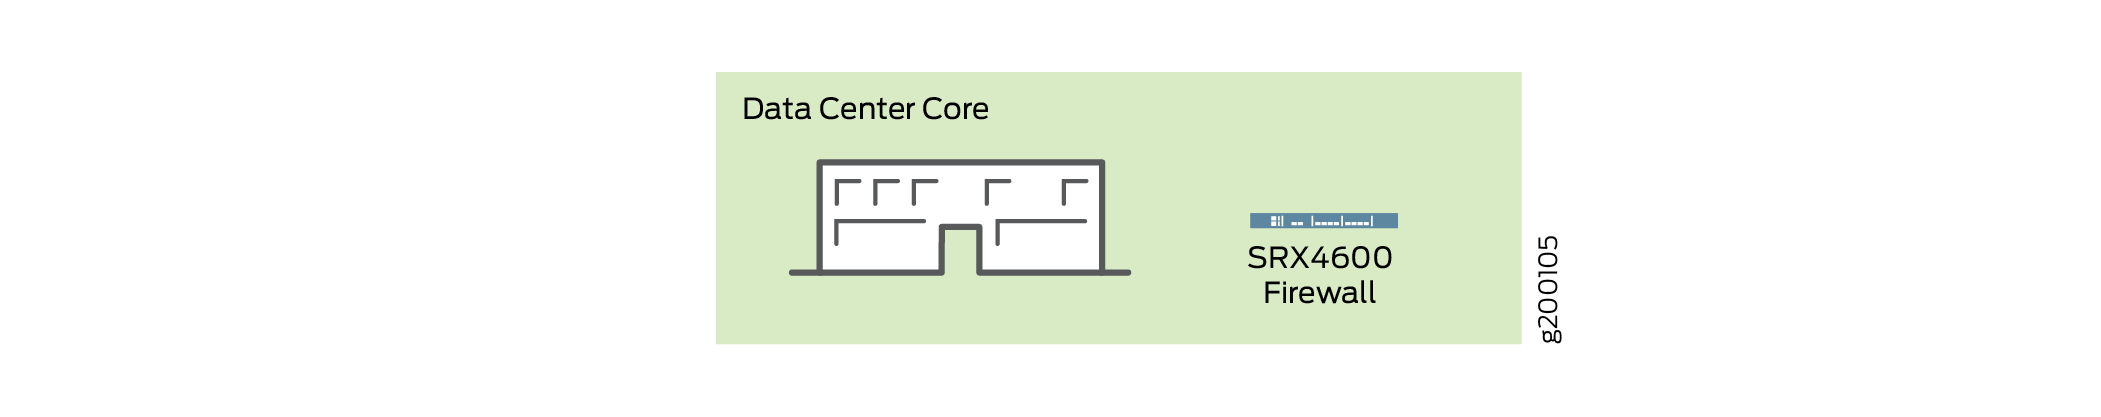 Deploying the SRX4600 Firewall at the Data Center Core